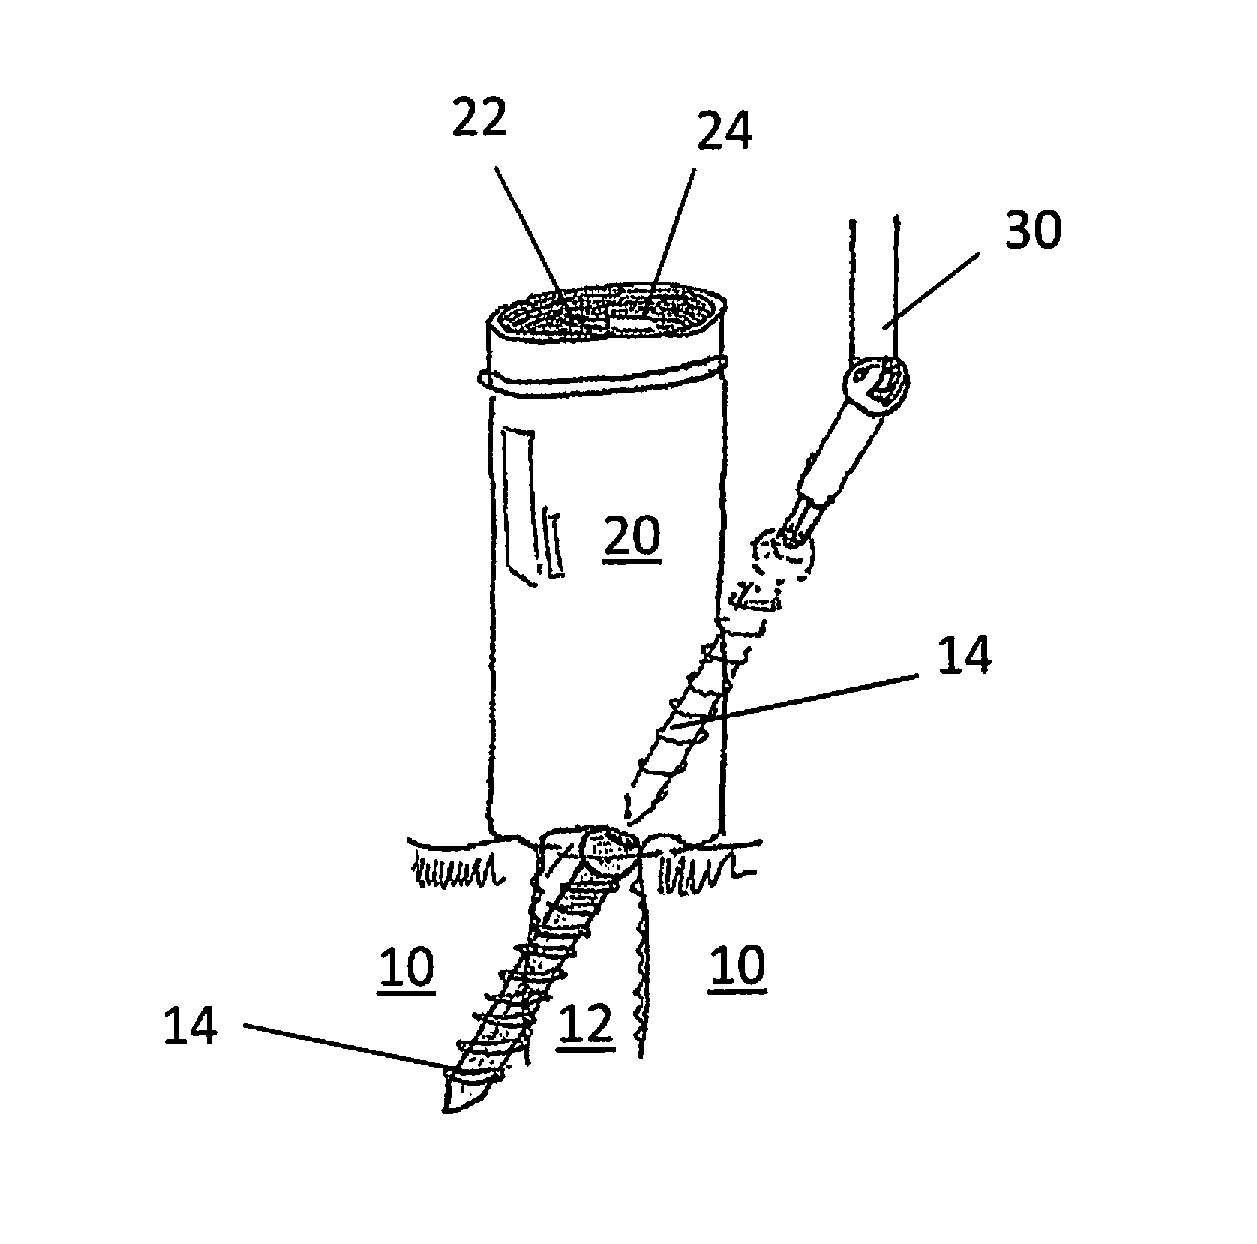 Surgical Devices for Access to Surgical Sites